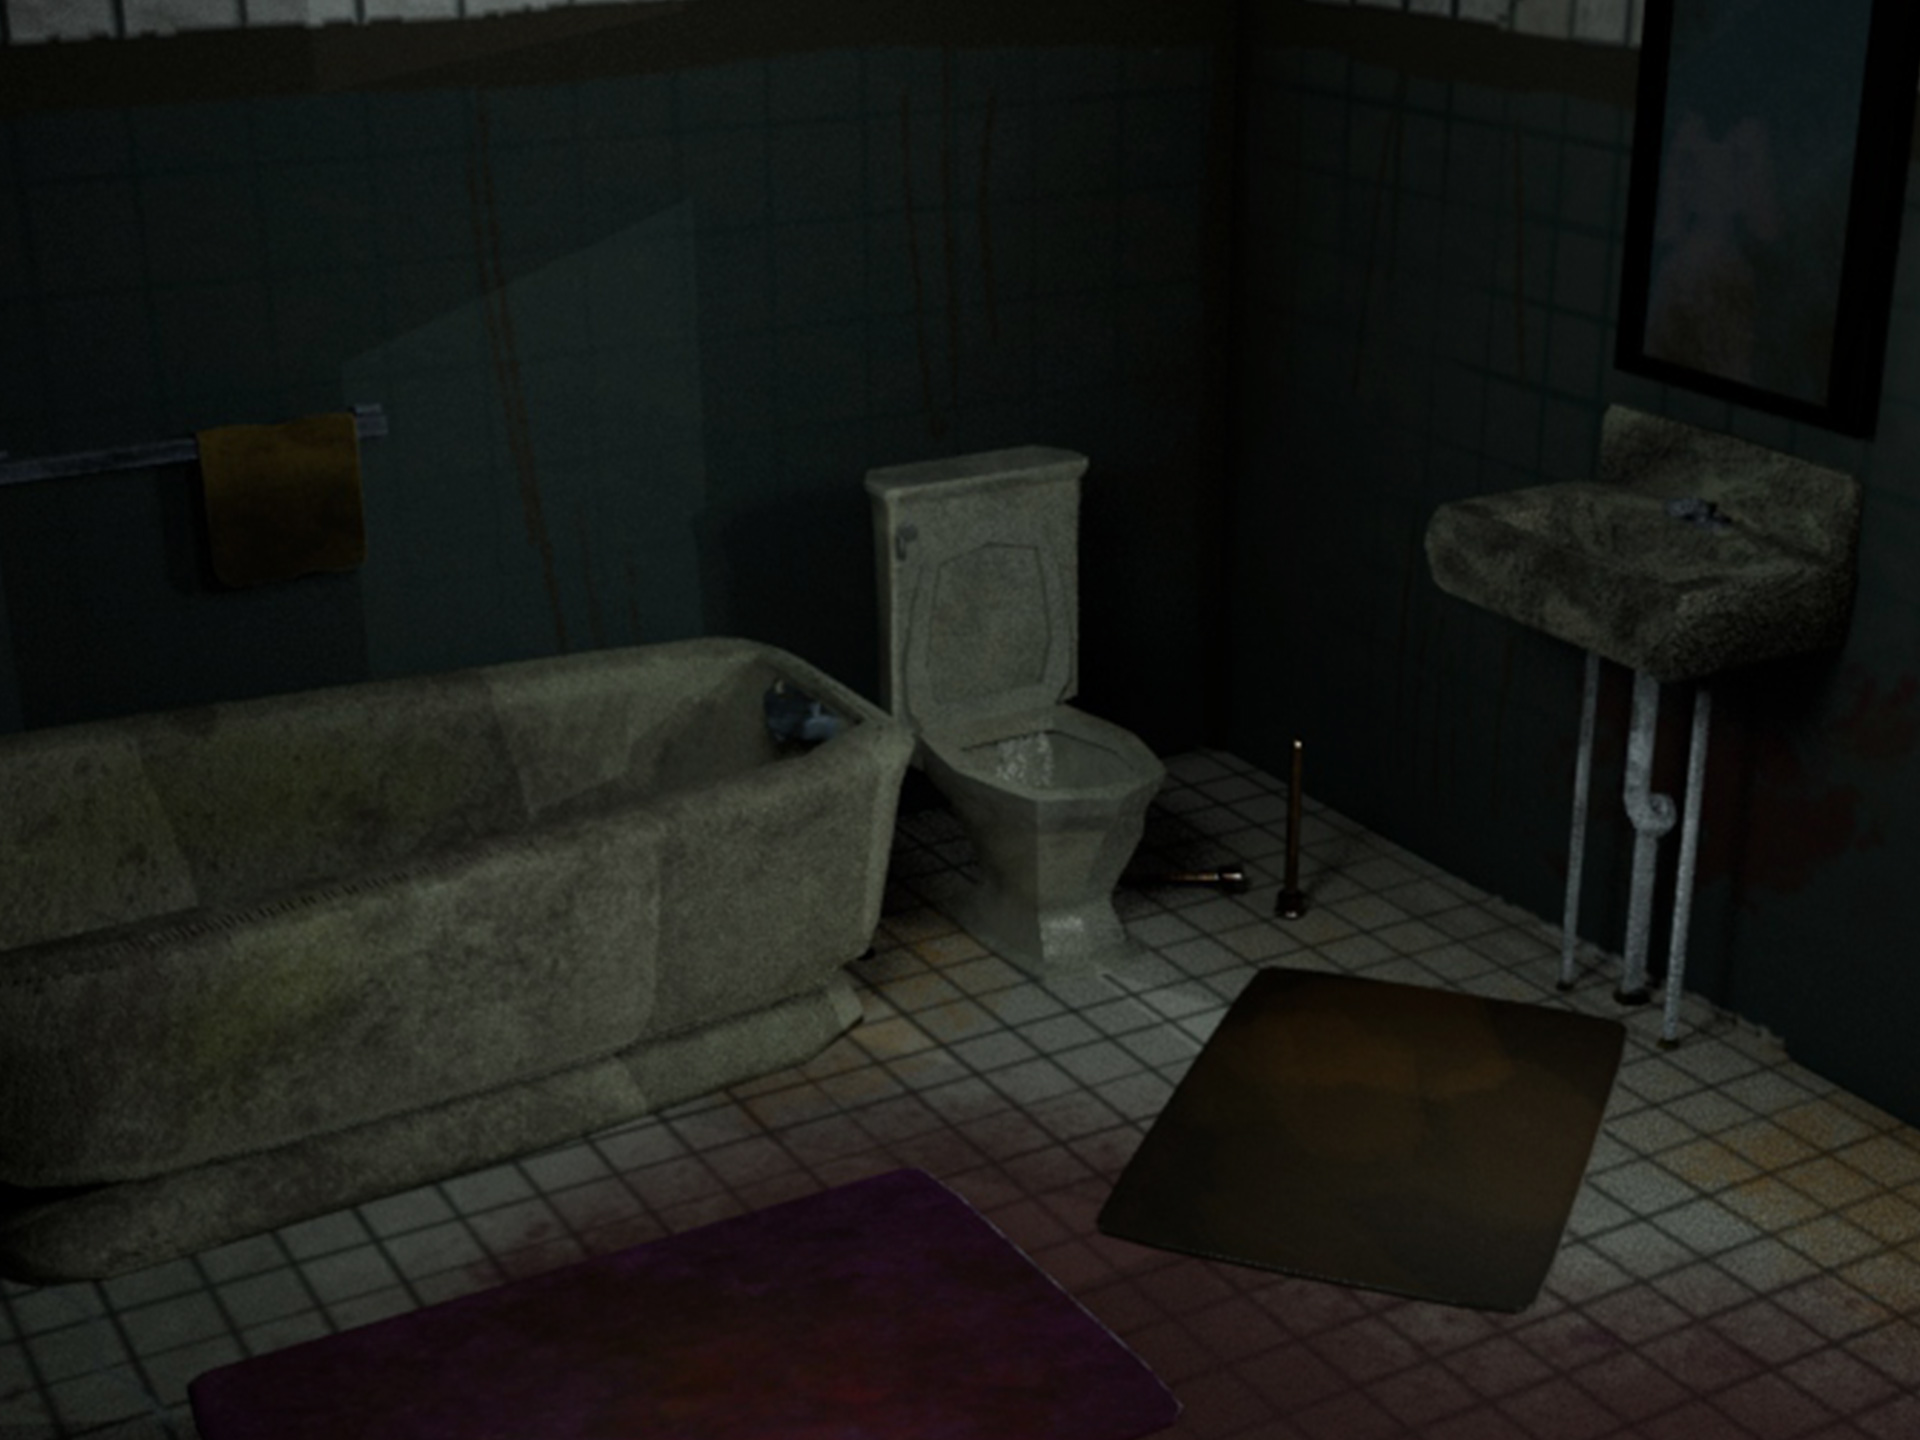 A cropped image of an incredibly dirty and decrepit bathroom, there is a large bloodstain in the corner.